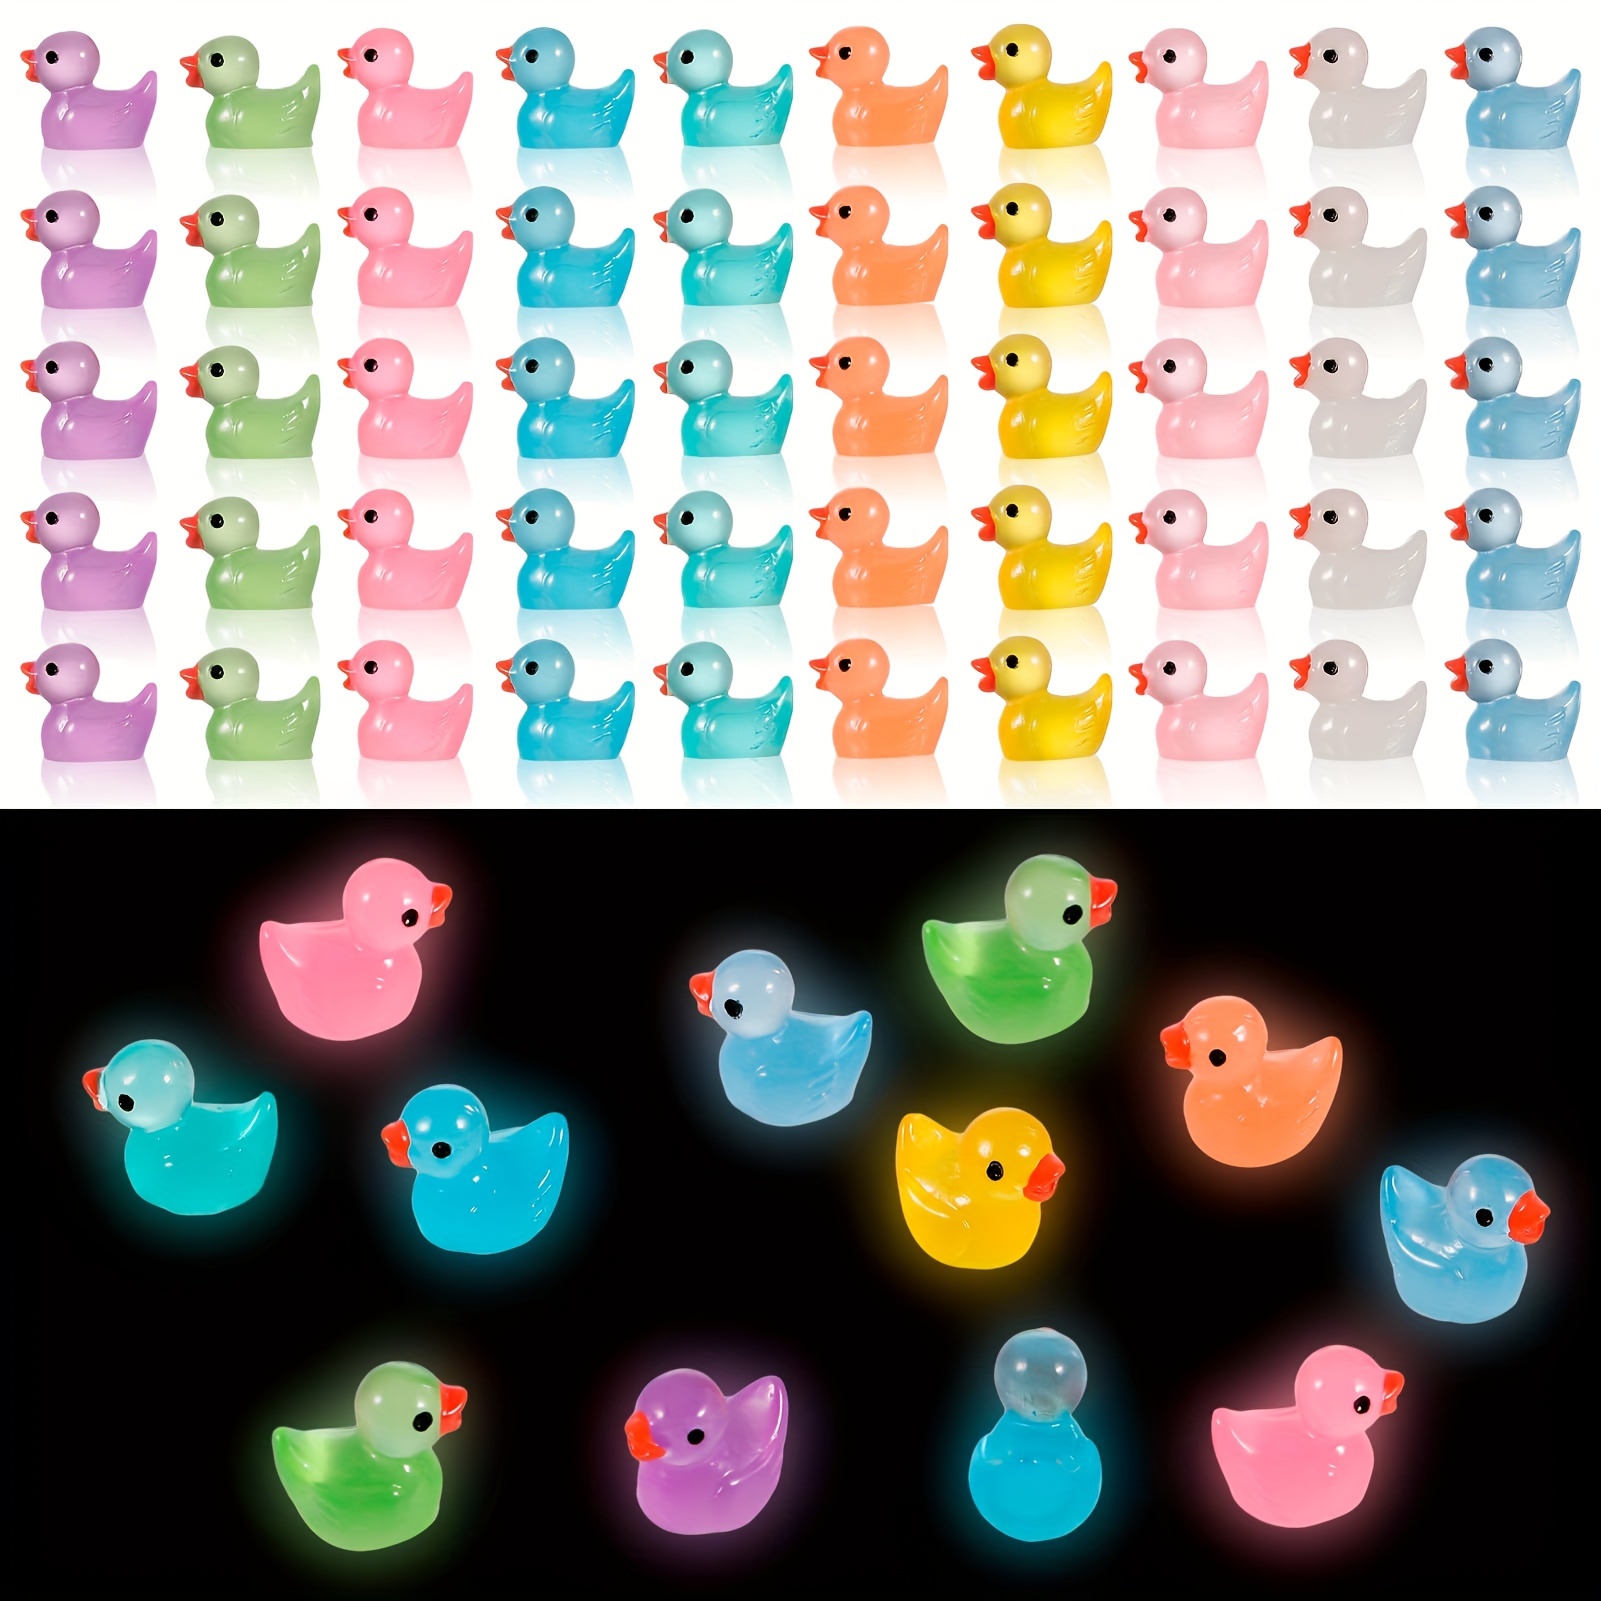 

100-piece Glow-in-the-dark Mini Ducks - Colorful Resin Figures For Fairy Gardens & Potted Plant Decor